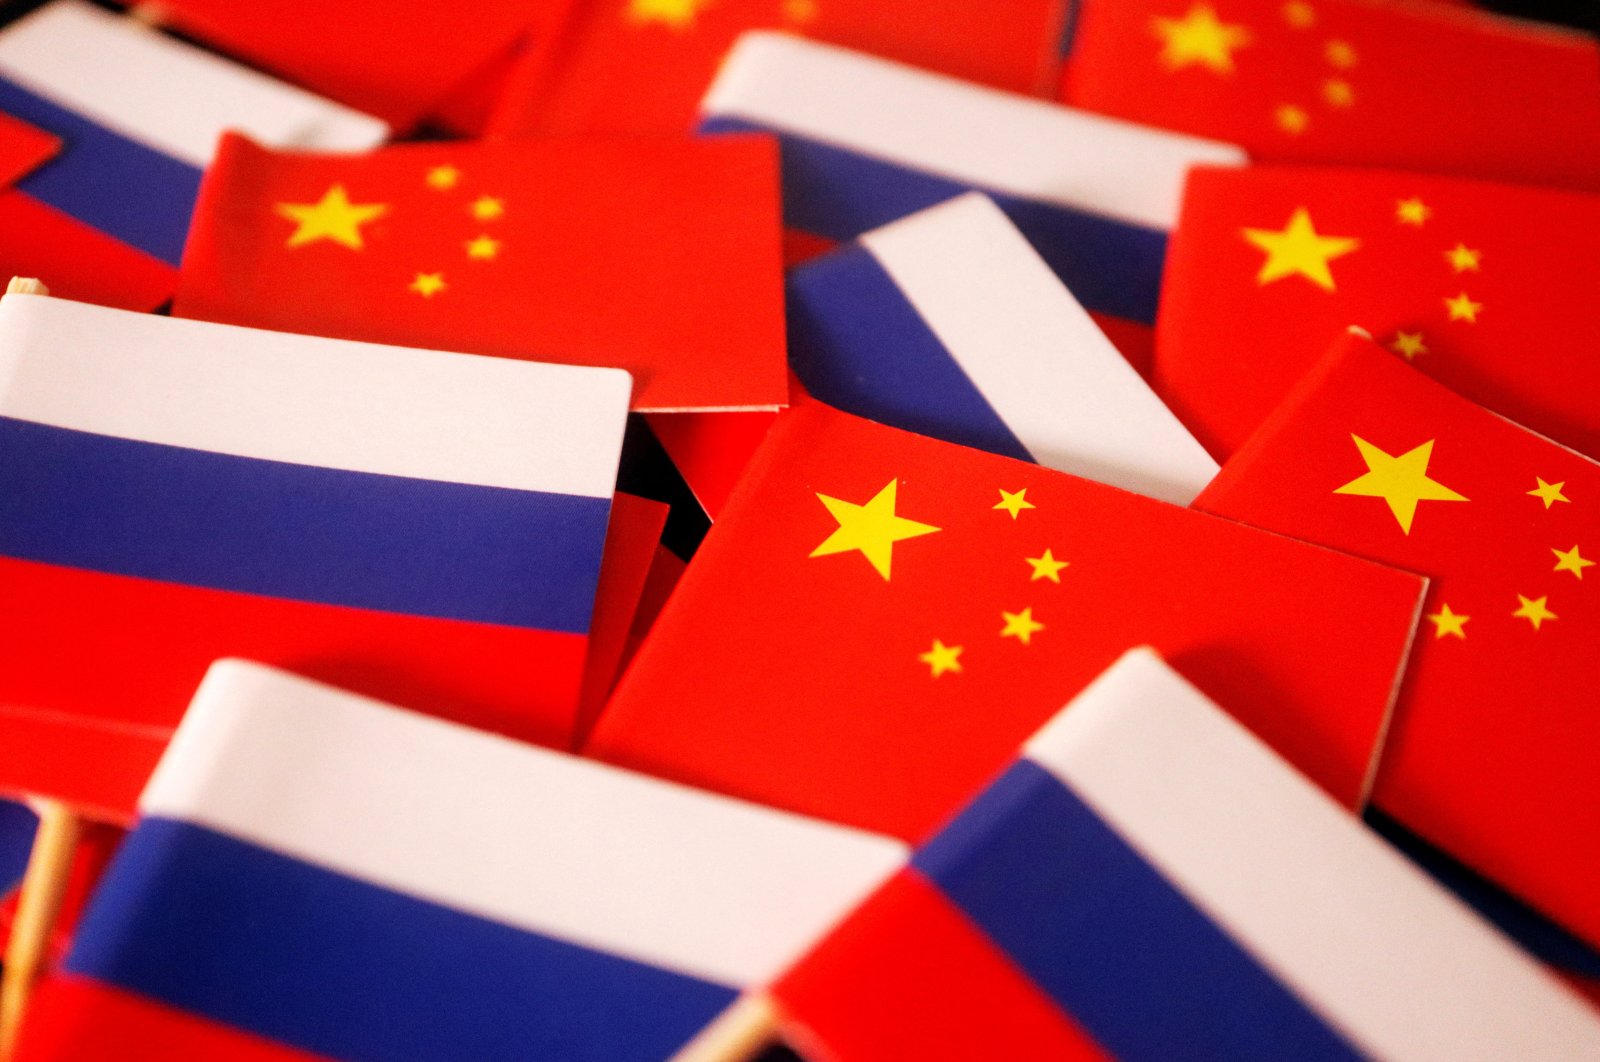 Flags of China and Russia are displayed in this illustration from March 24, 2022. (Reuters Photo)